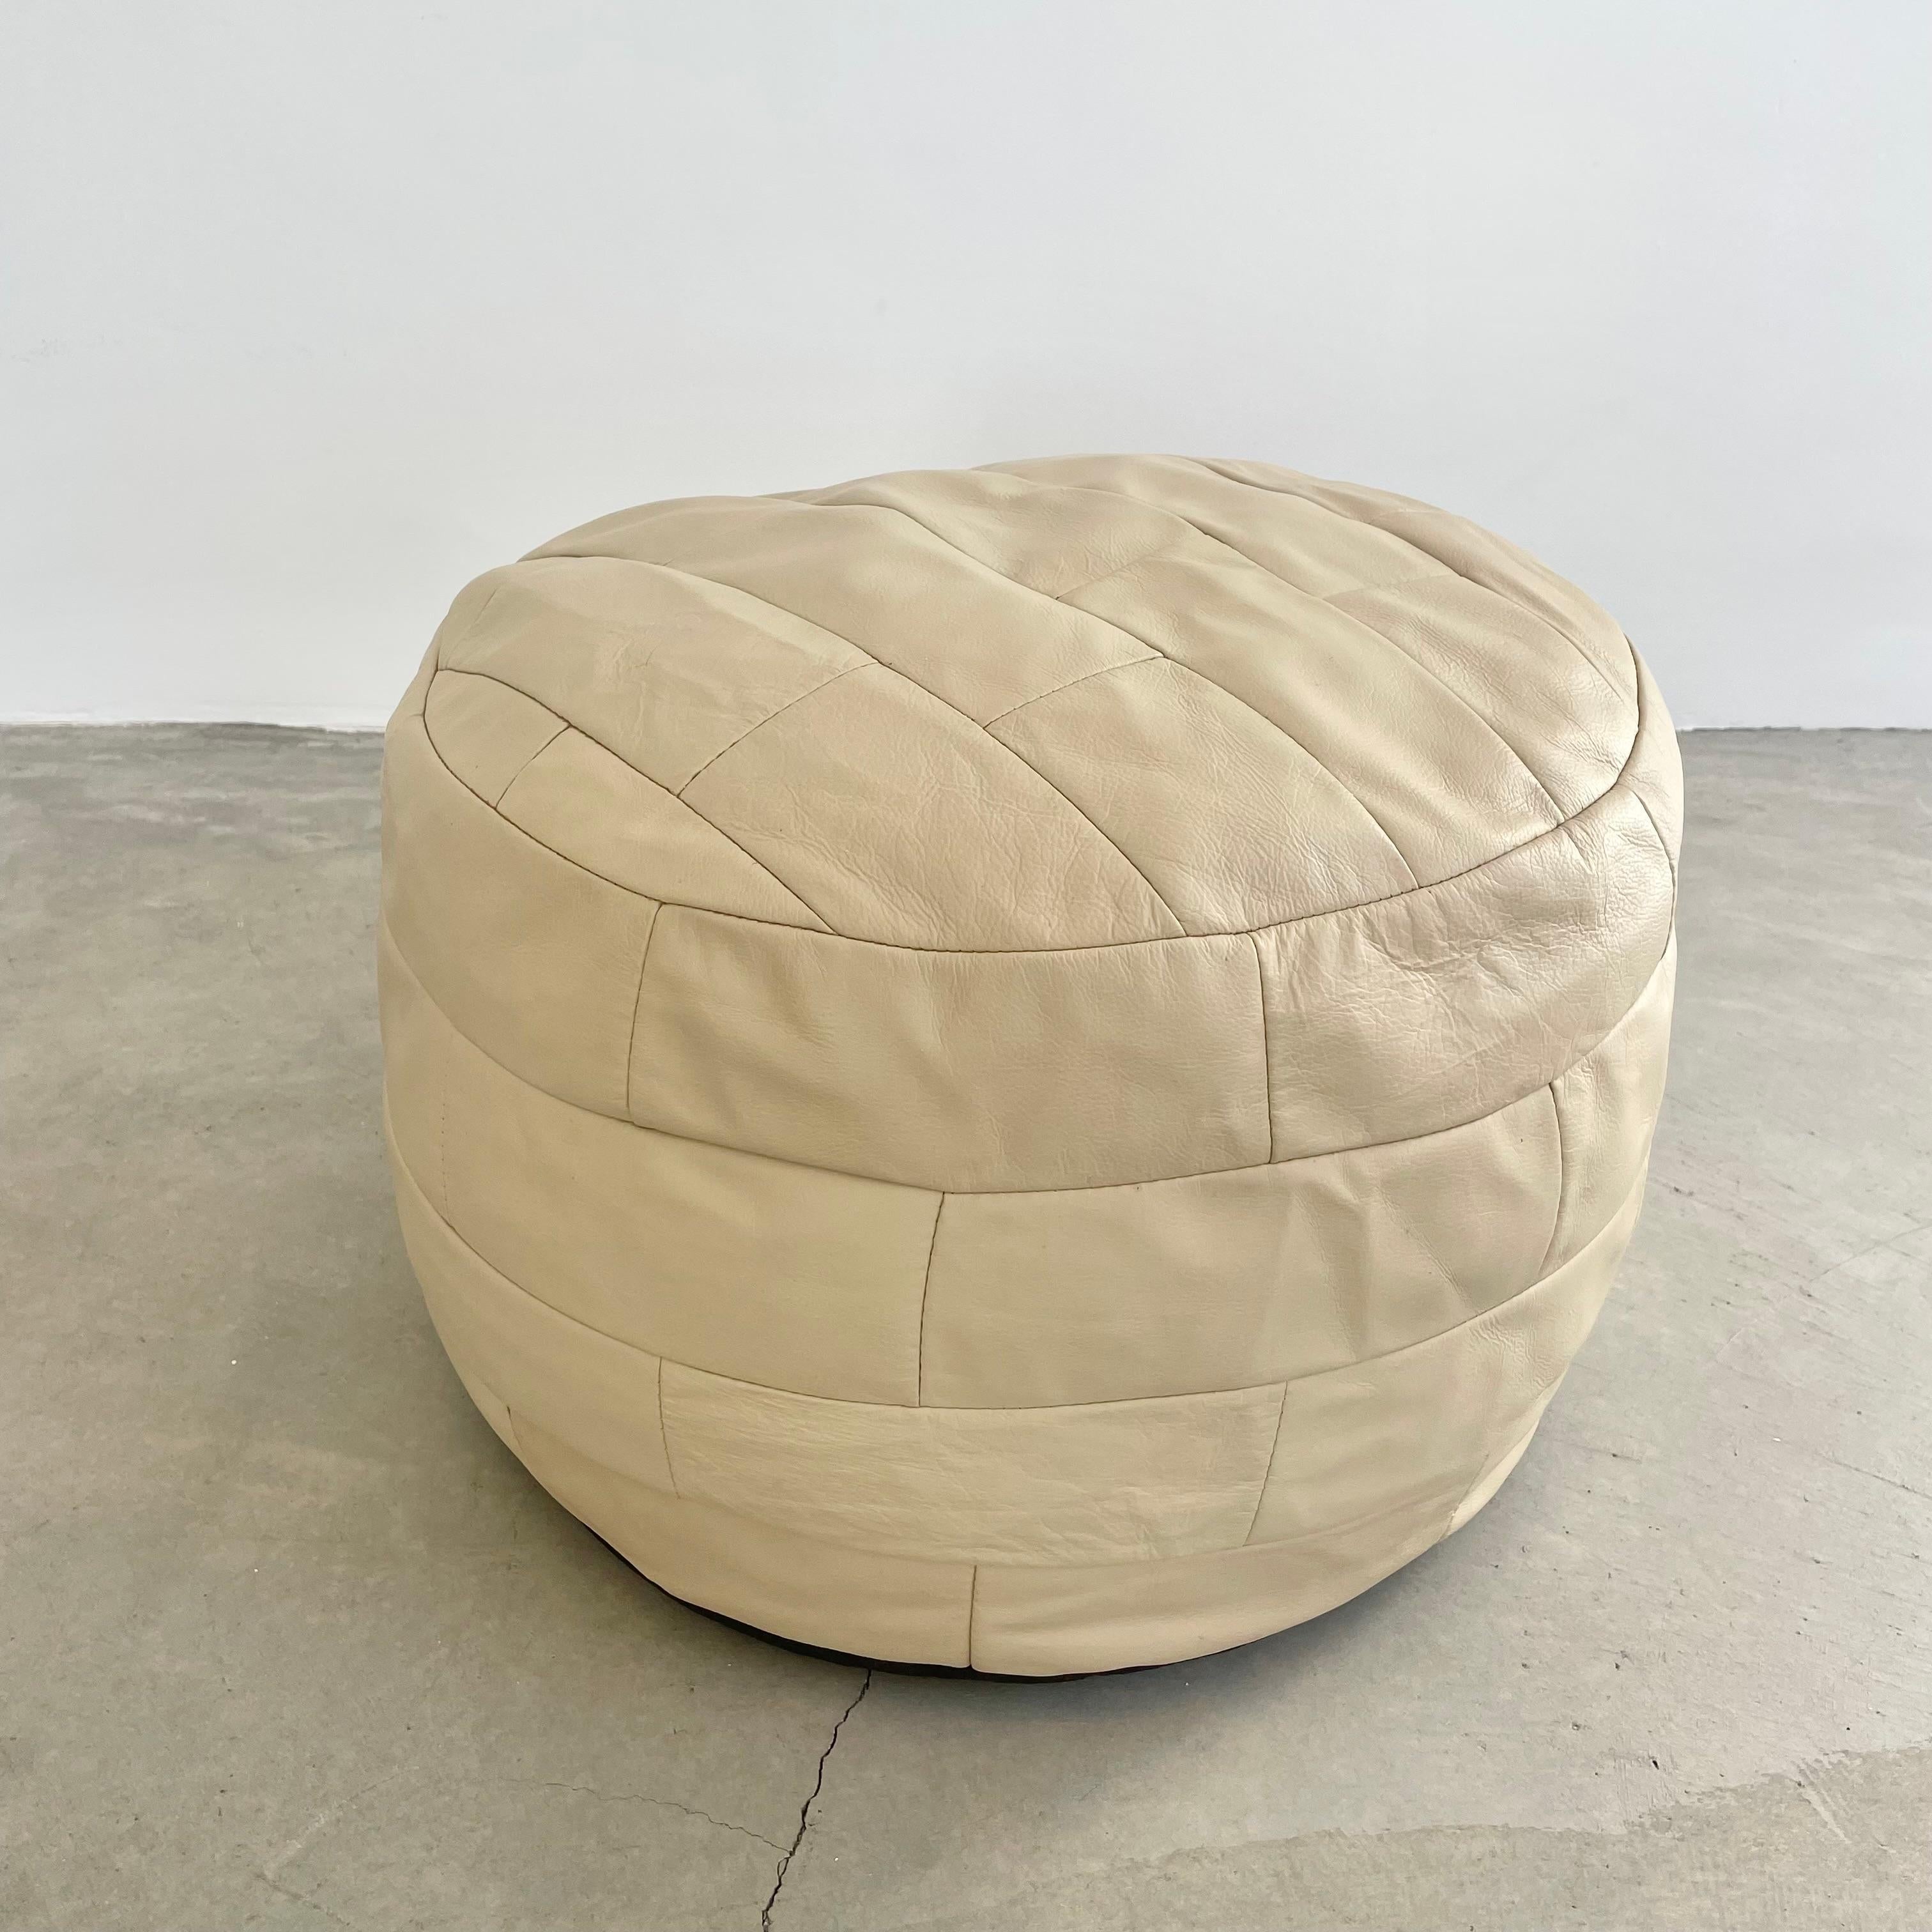 Chic cream leather pouf/ottoman by Swiss designer De Sede with square patchwork. Handmade with wonderful faded patina. Gorgeous accent piece. Good vintage condition. Wear appropriate with age. Brand new filler. Perfect living room decor, foot rest